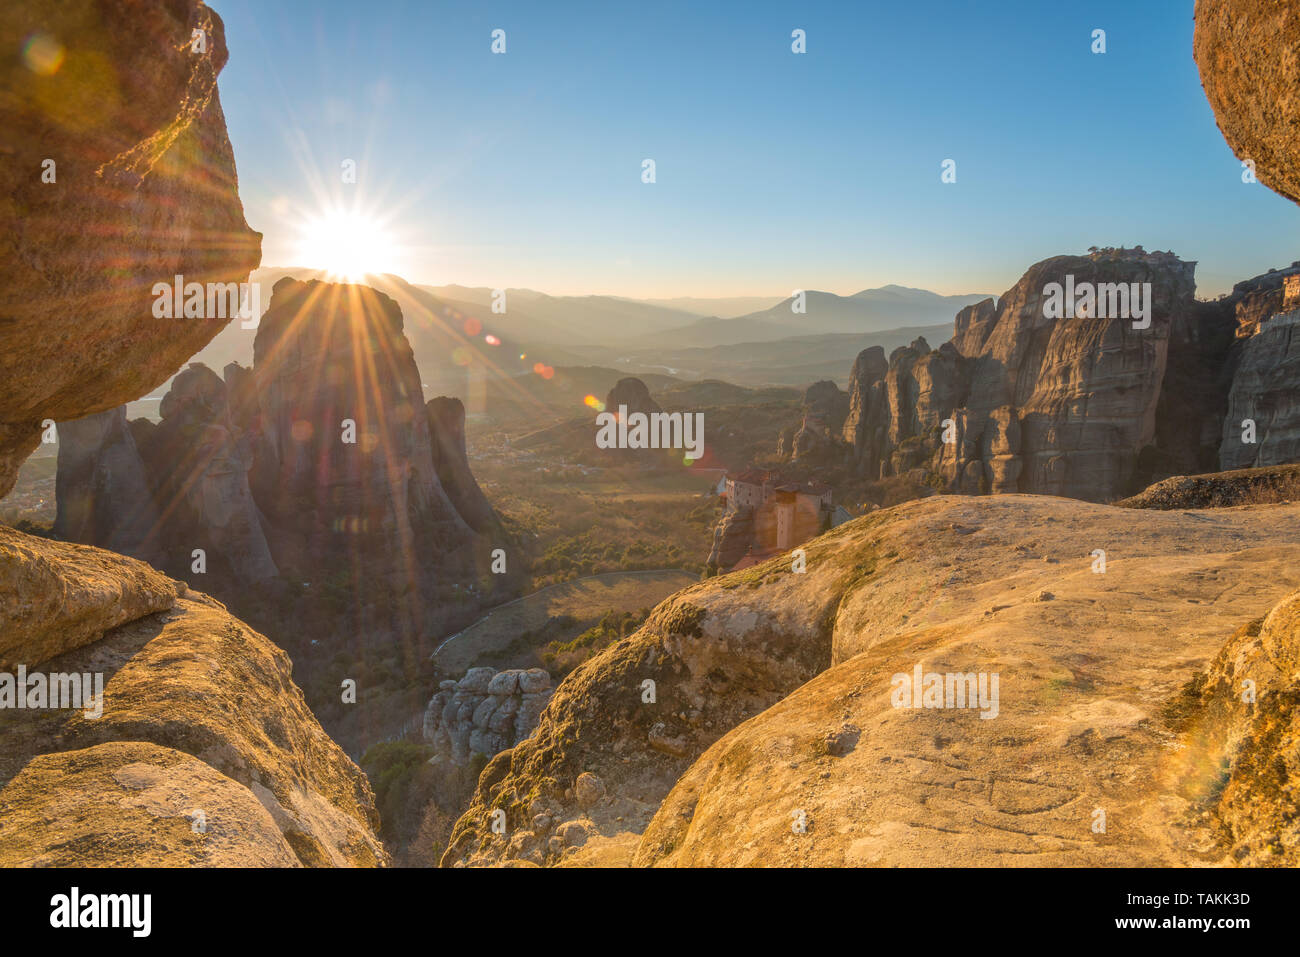 Golden hour sunset from sunset rock in Meteora, Greece, overlooking Roussanou and Grand Meteora monasteries in the valley. Stock Photo